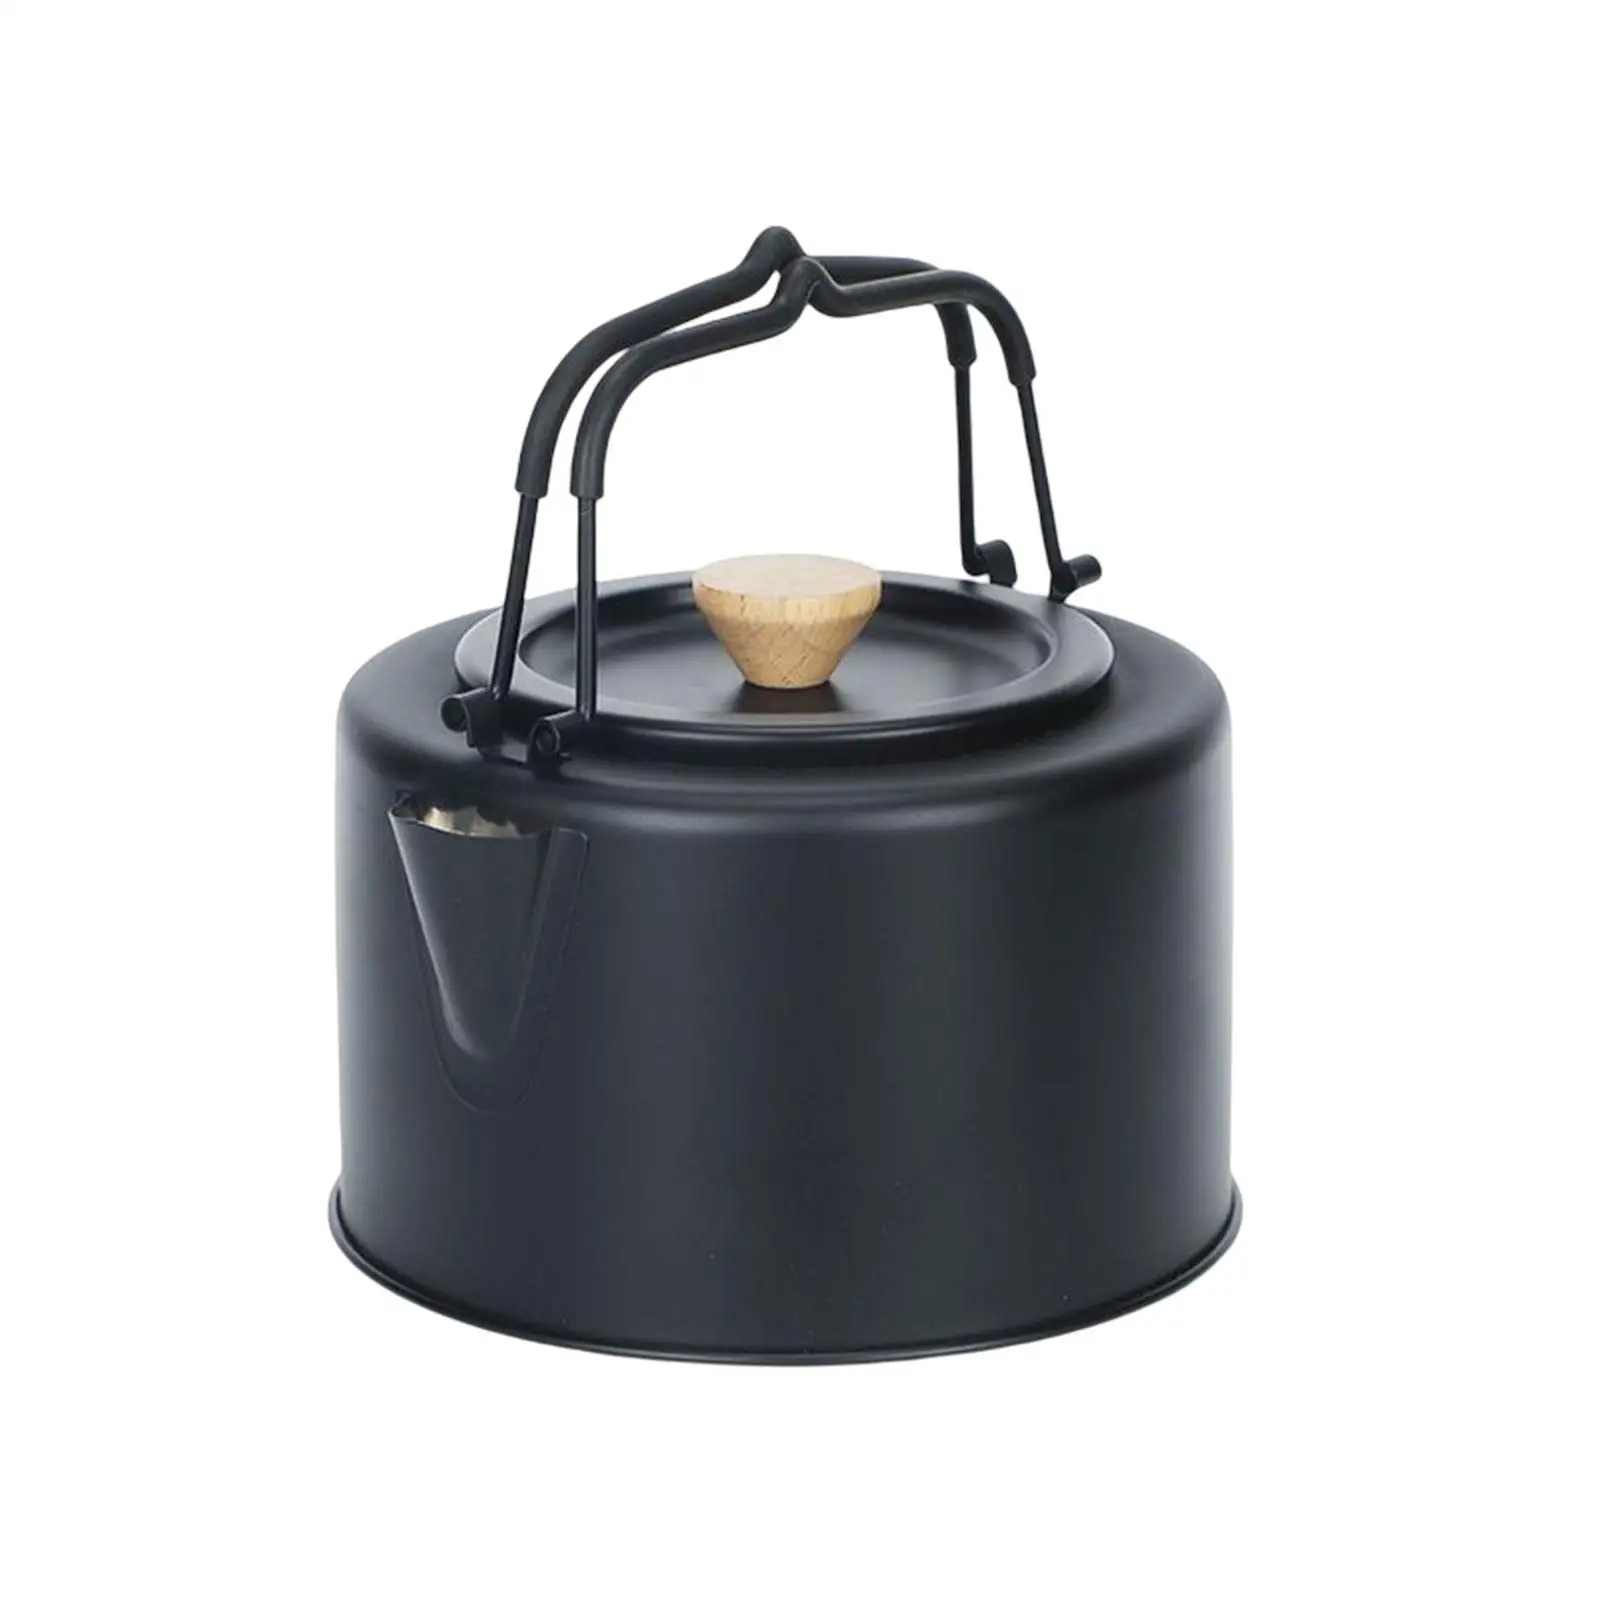 Portable Camping Kettle Teapot 1L Kettle with Lid for Kitchen Camping Picnic